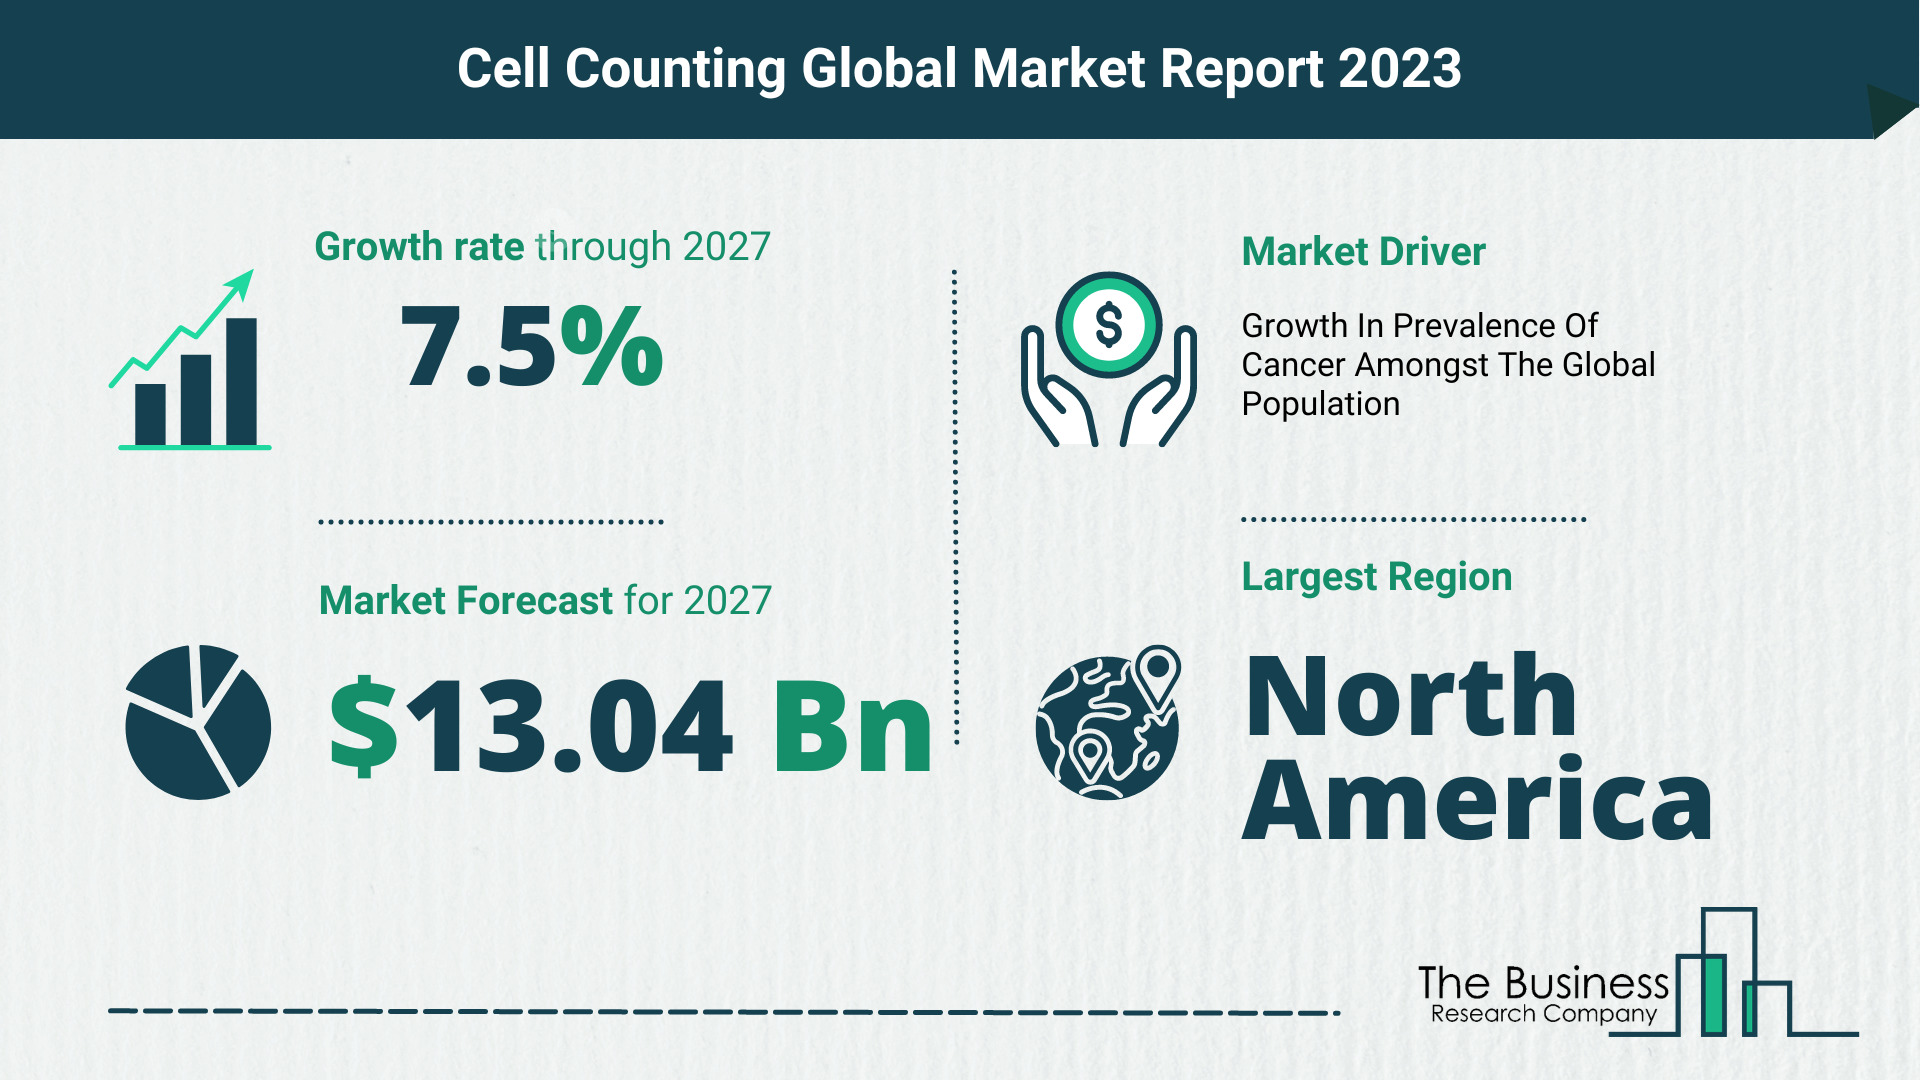 Global Cell Counting Market